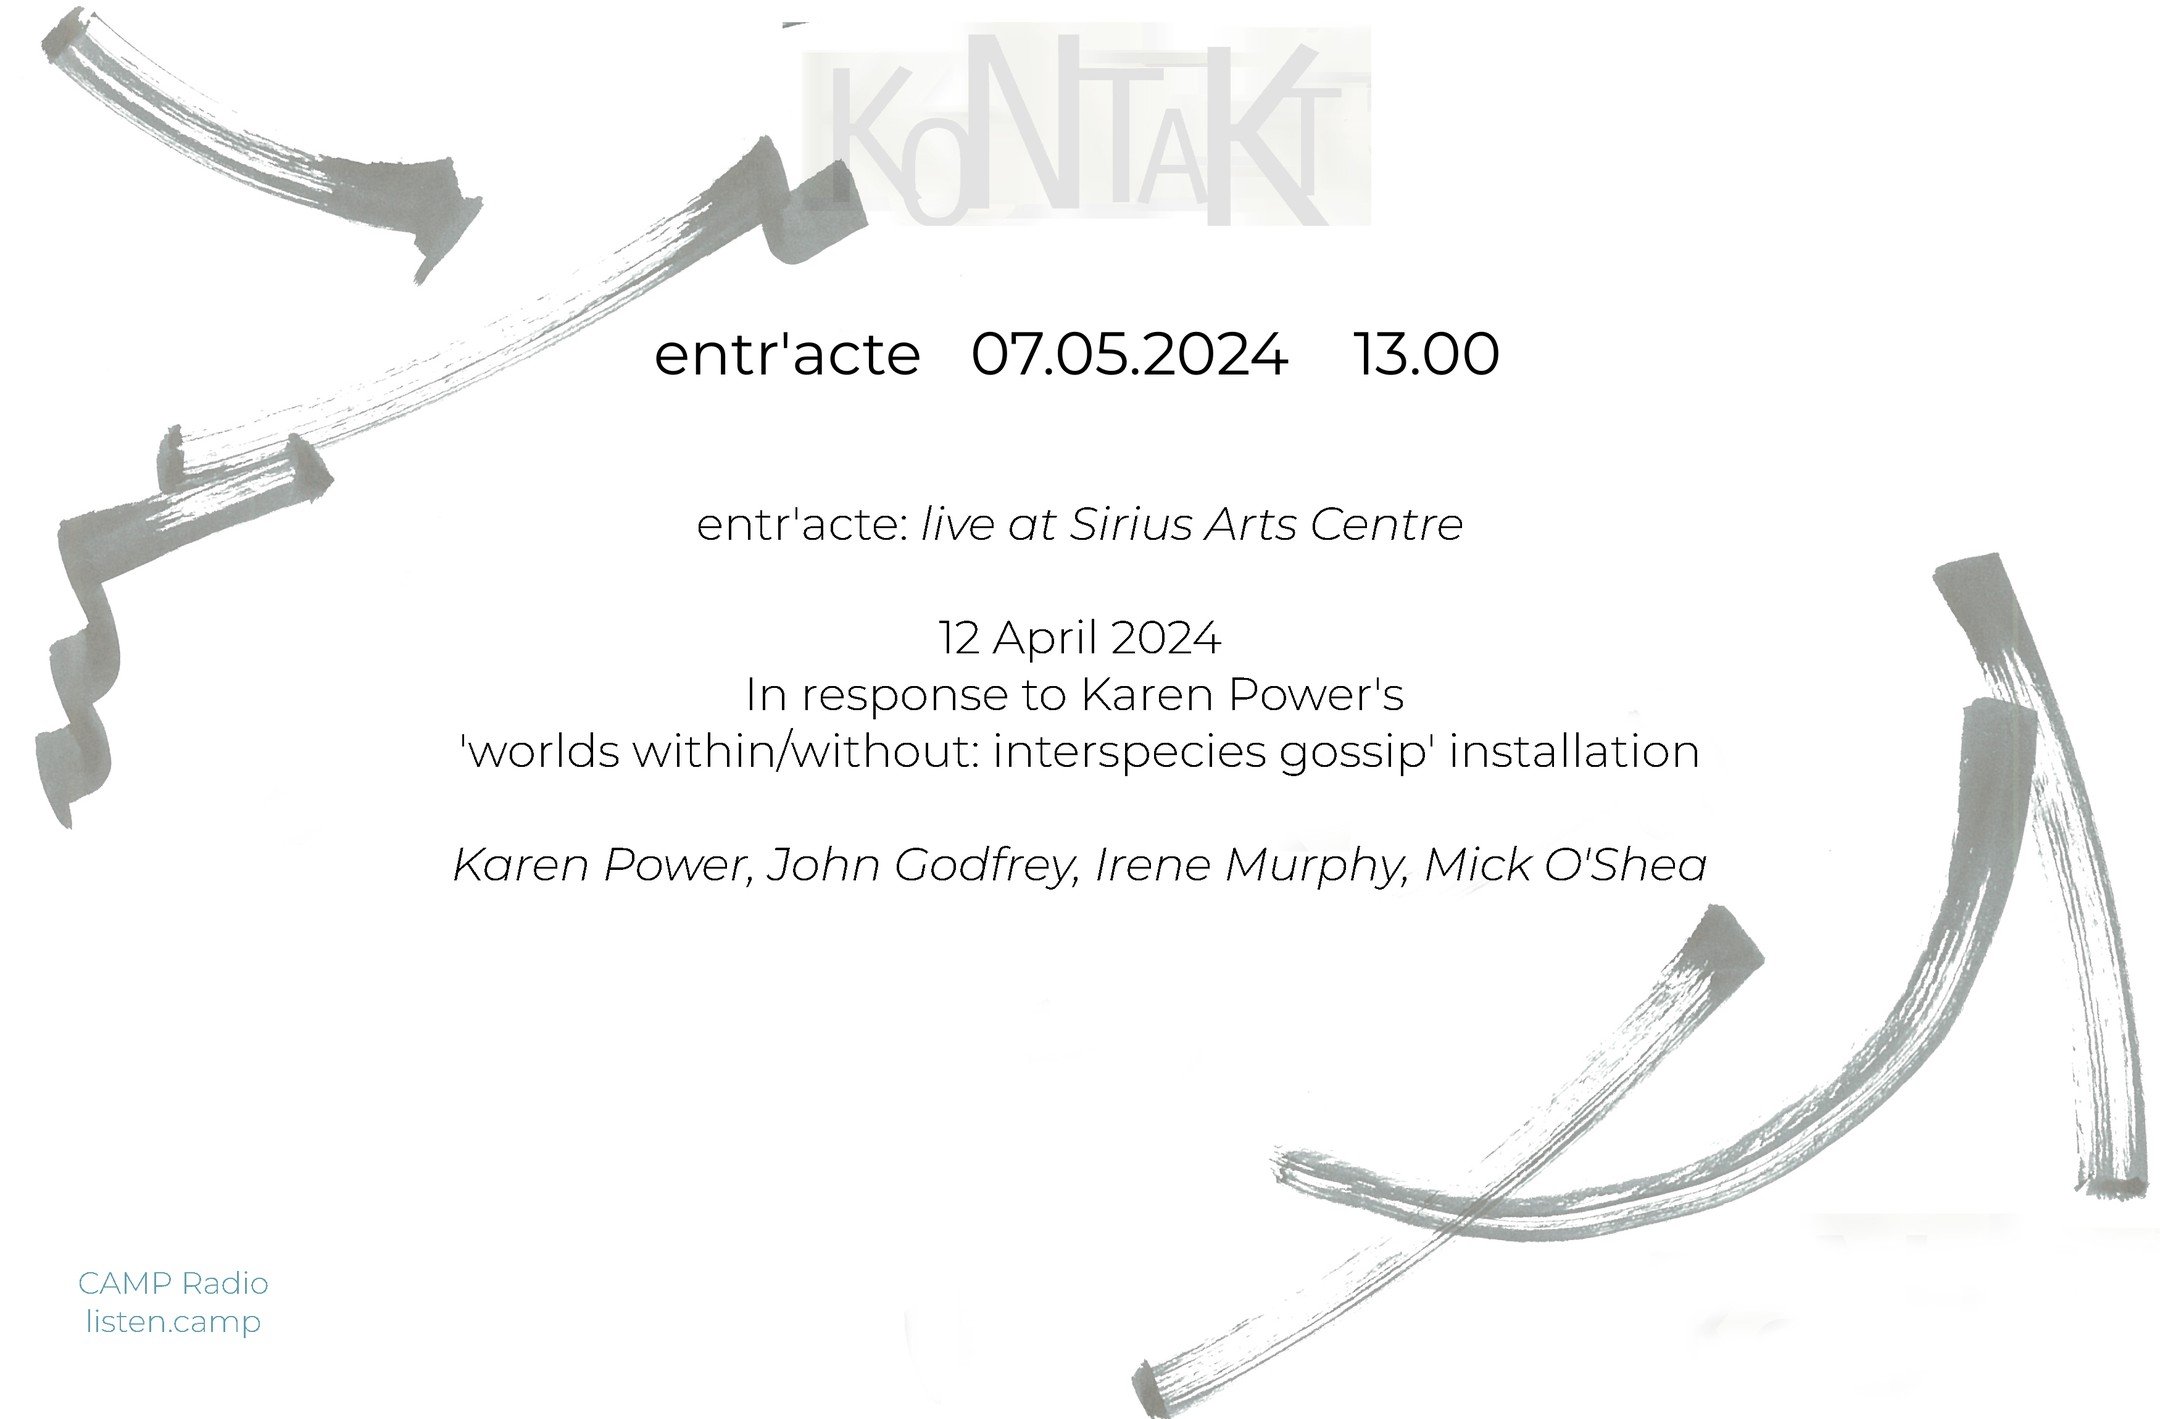 Next week's #Kontakt show on @camp_fr Radio - a full live set from brand new improvising sound art group entr'acte.

Live at Sirius Arts Centre from April 2024, with Karen Power, John Godfrey, Irene Murphy and Mick O'Shea.

Listen in at 13.00 CET (12